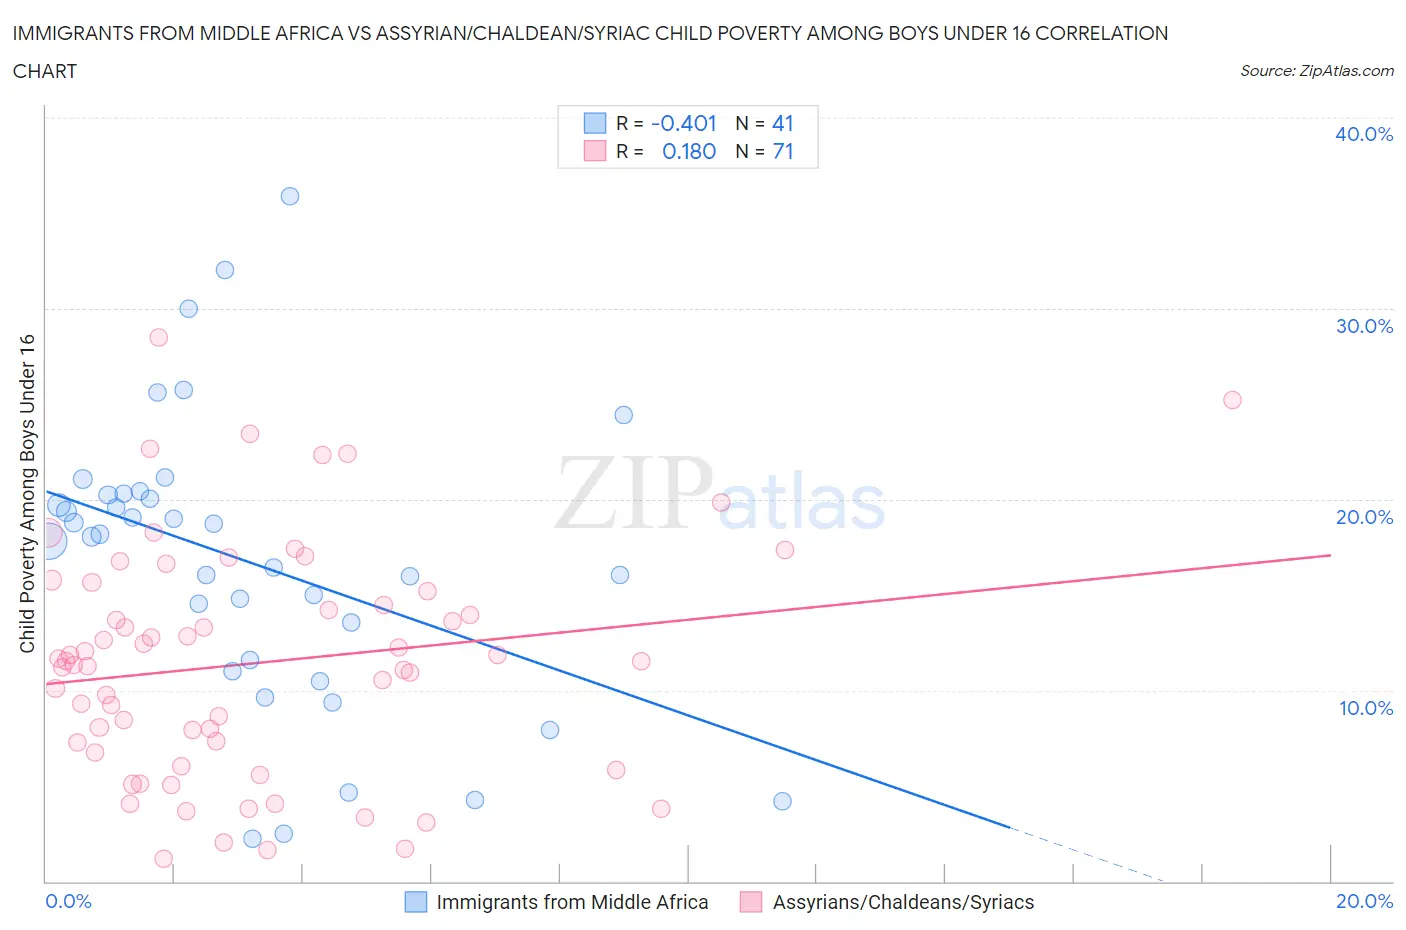 Immigrants from Middle Africa vs Assyrian/Chaldean/Syriac Child Poverty Among Boys Under 16